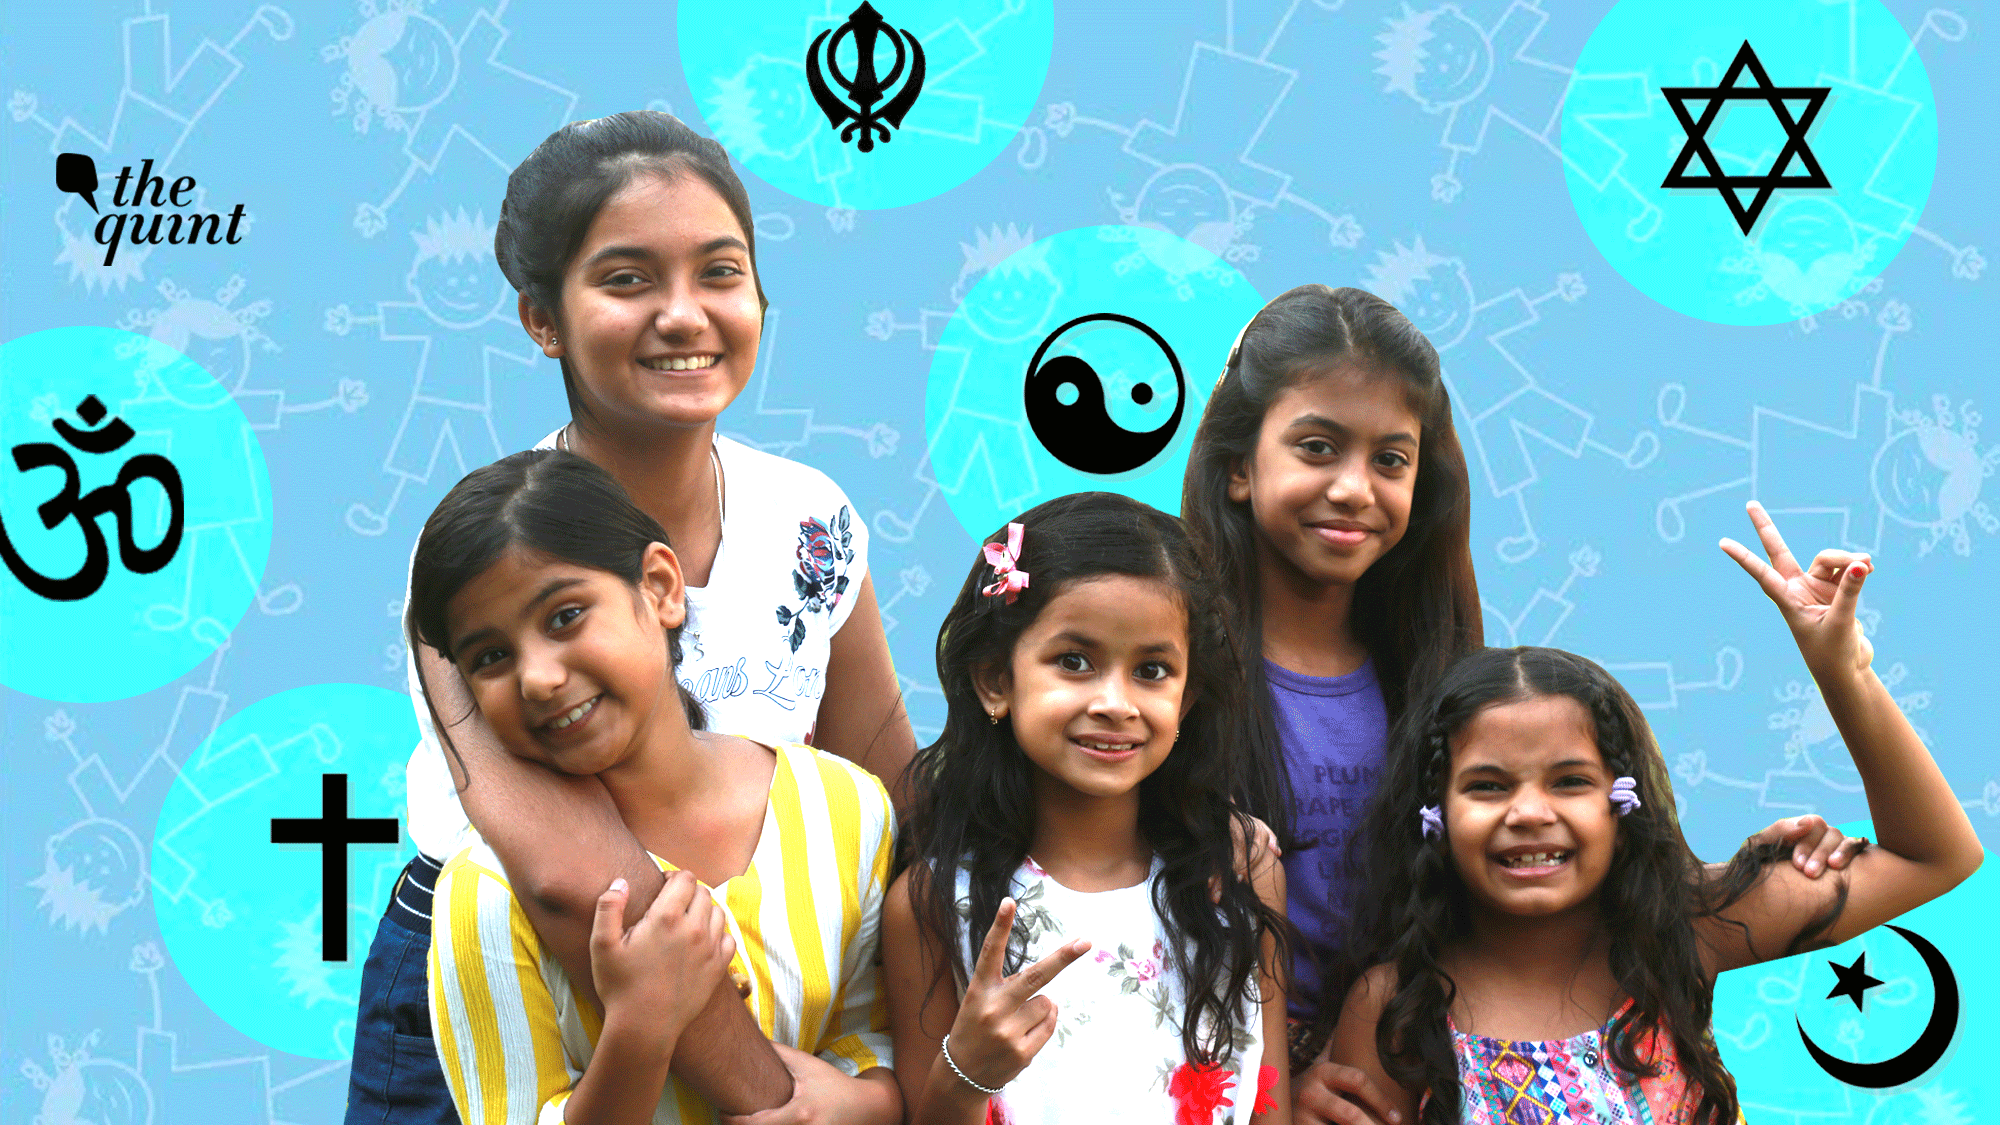 The Quint spoke to the kids under the age of 13, about the Ayodhya dispute, religion &amp; more.